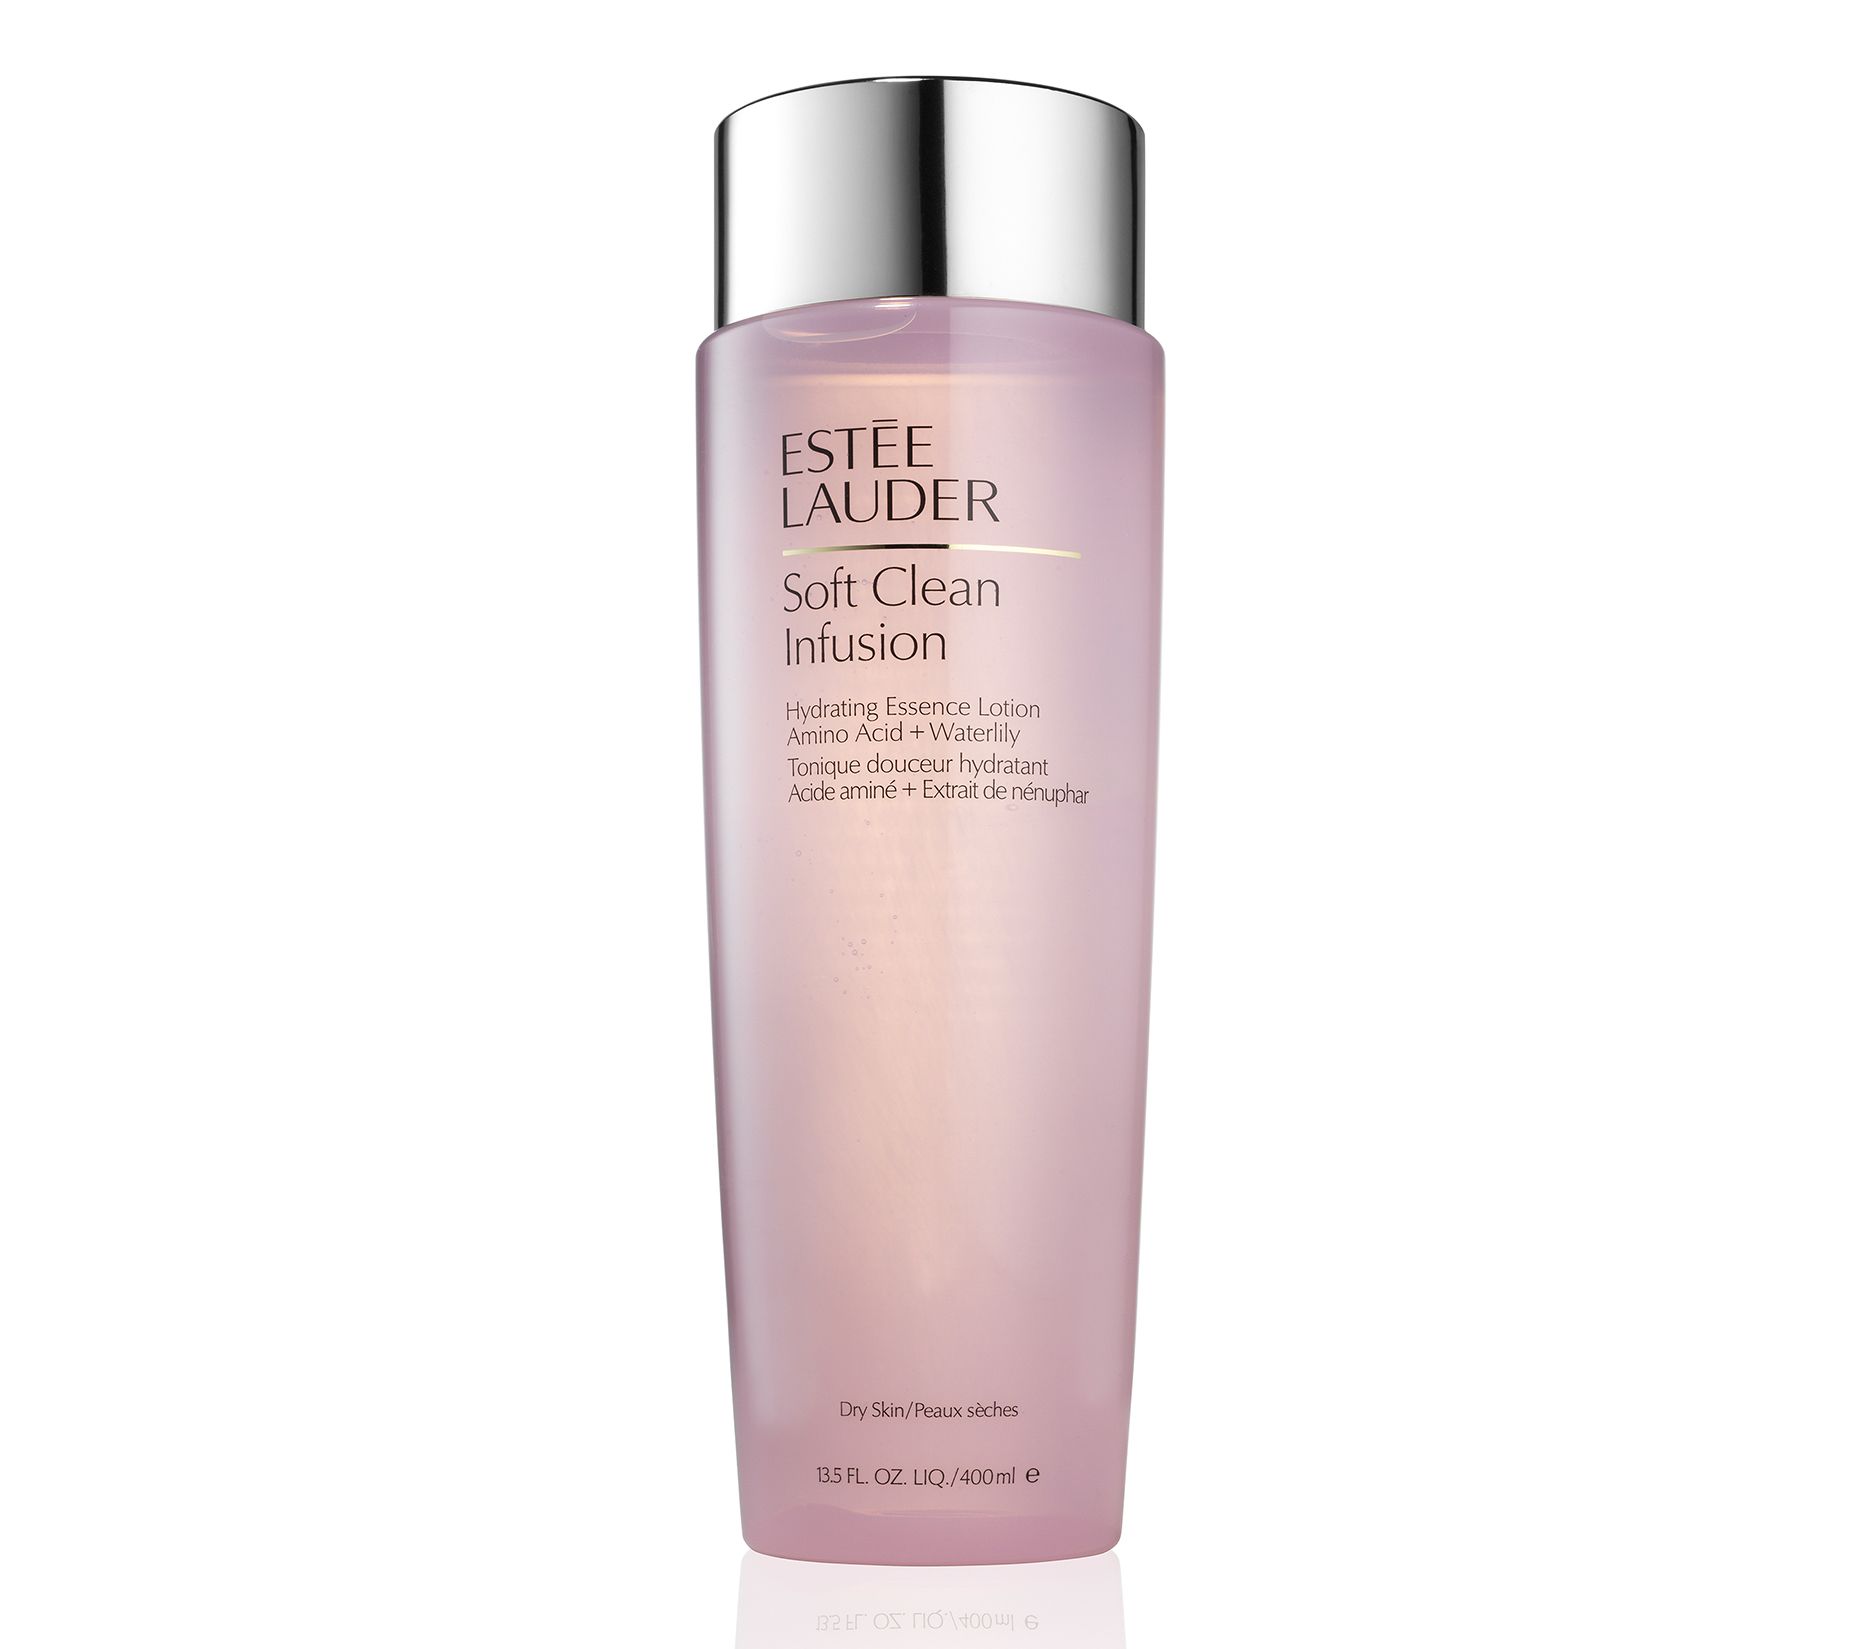 Estee Lauder Soft Clean Infusion Hydrating Essence Lotion 